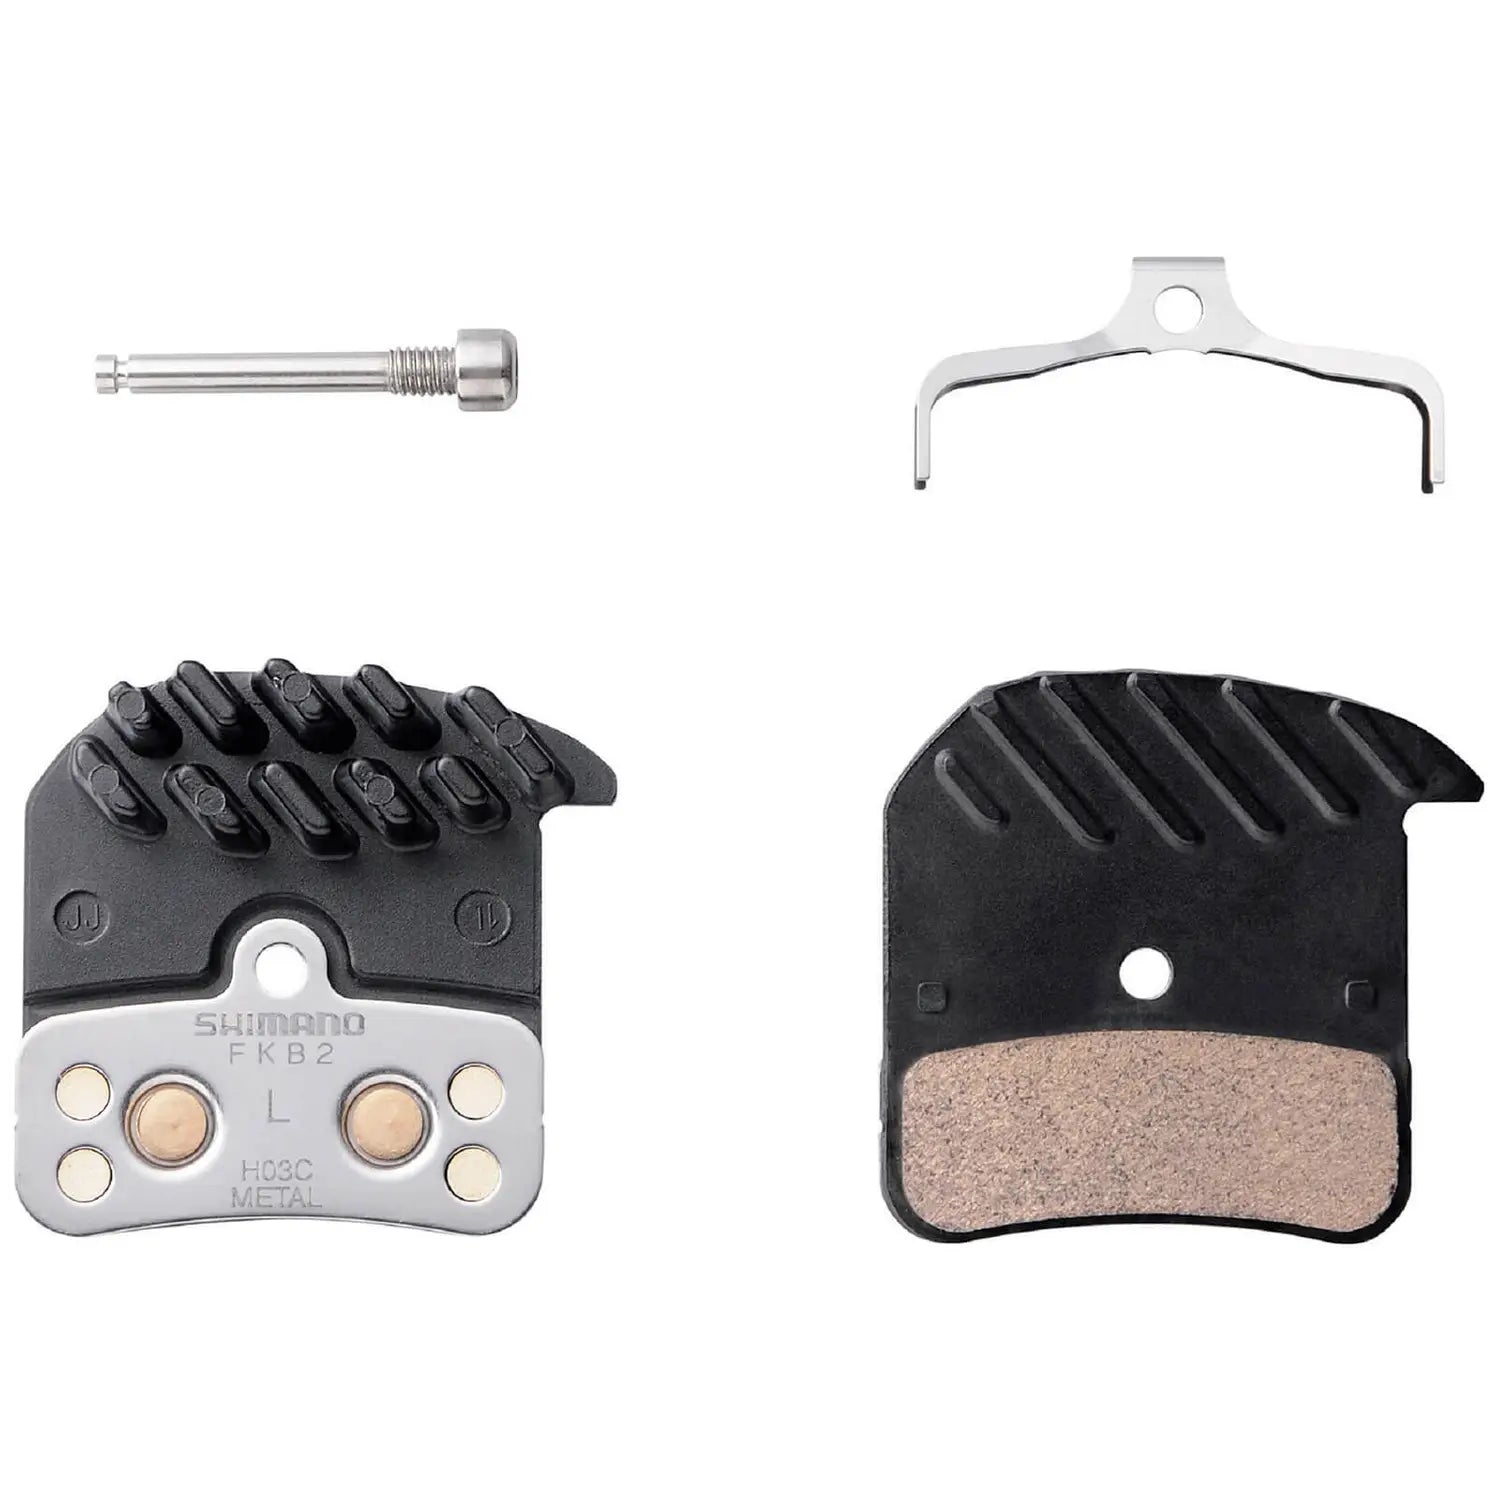 Shimano H03C Disc Brake Pads - Alloy Backed With Cooling Fins - Sintered